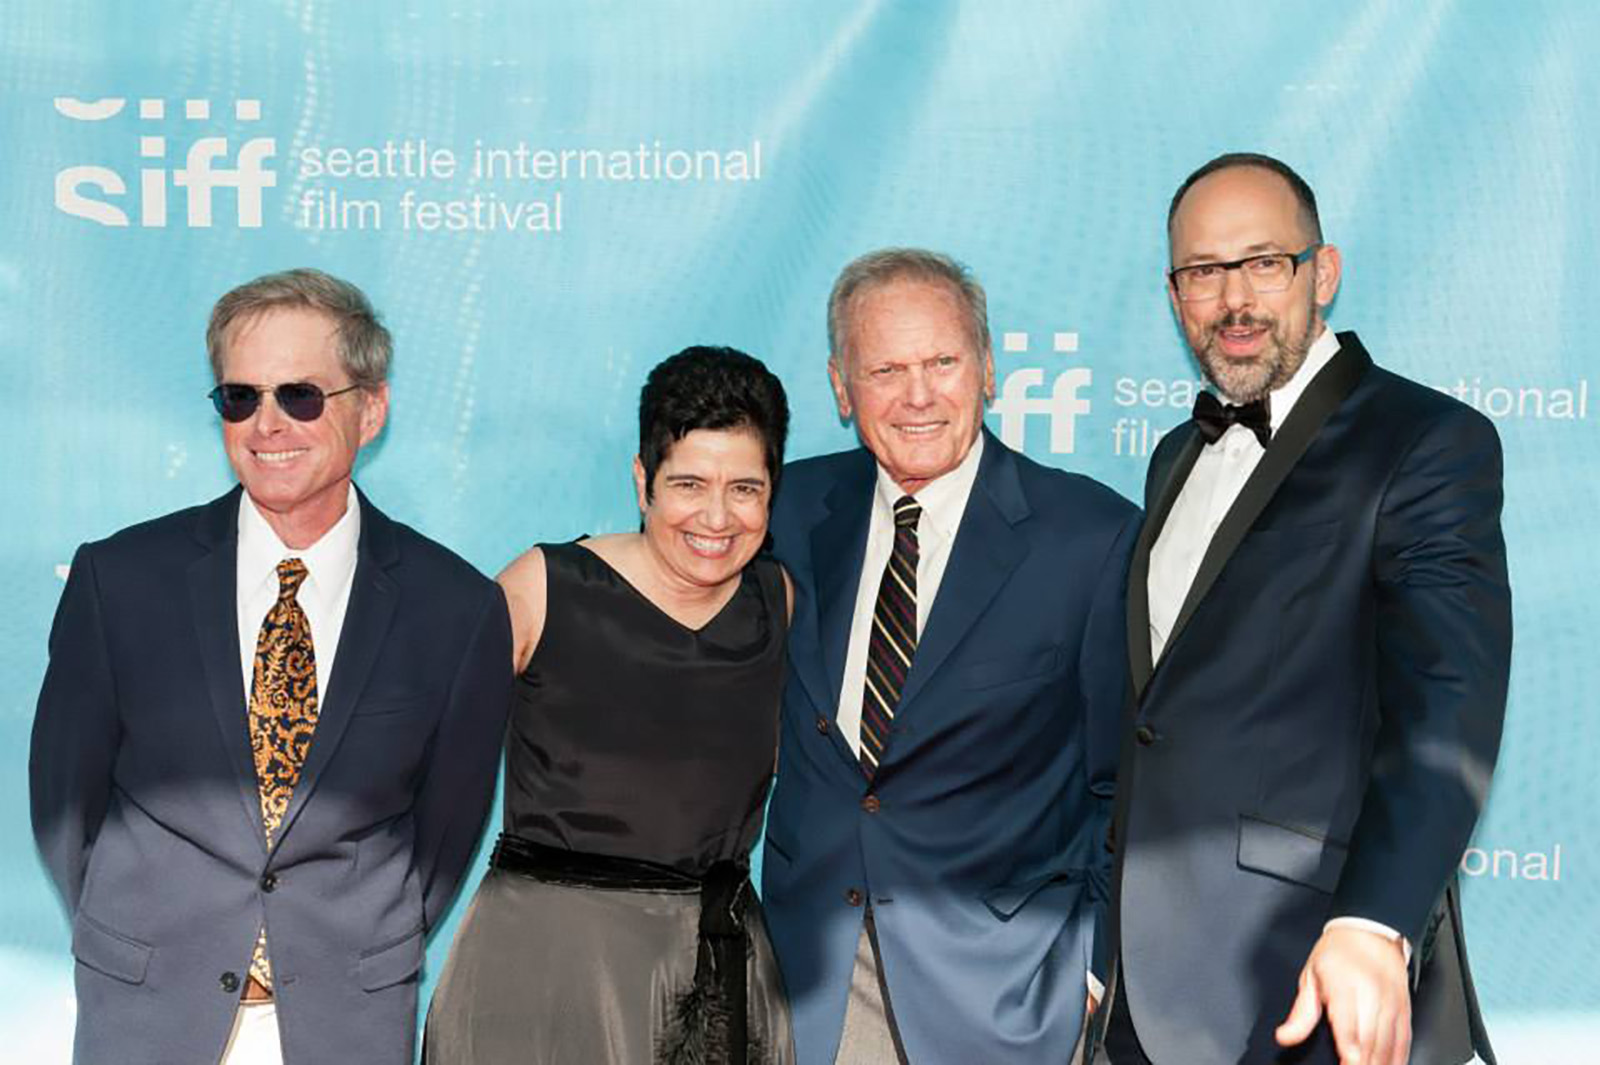 SIFF Managing Director, Mary Bacarella, and Artistic Director, Carl Spence, grace the red carpet on Opening Night with attendees, including photographer, Patrick McMullen